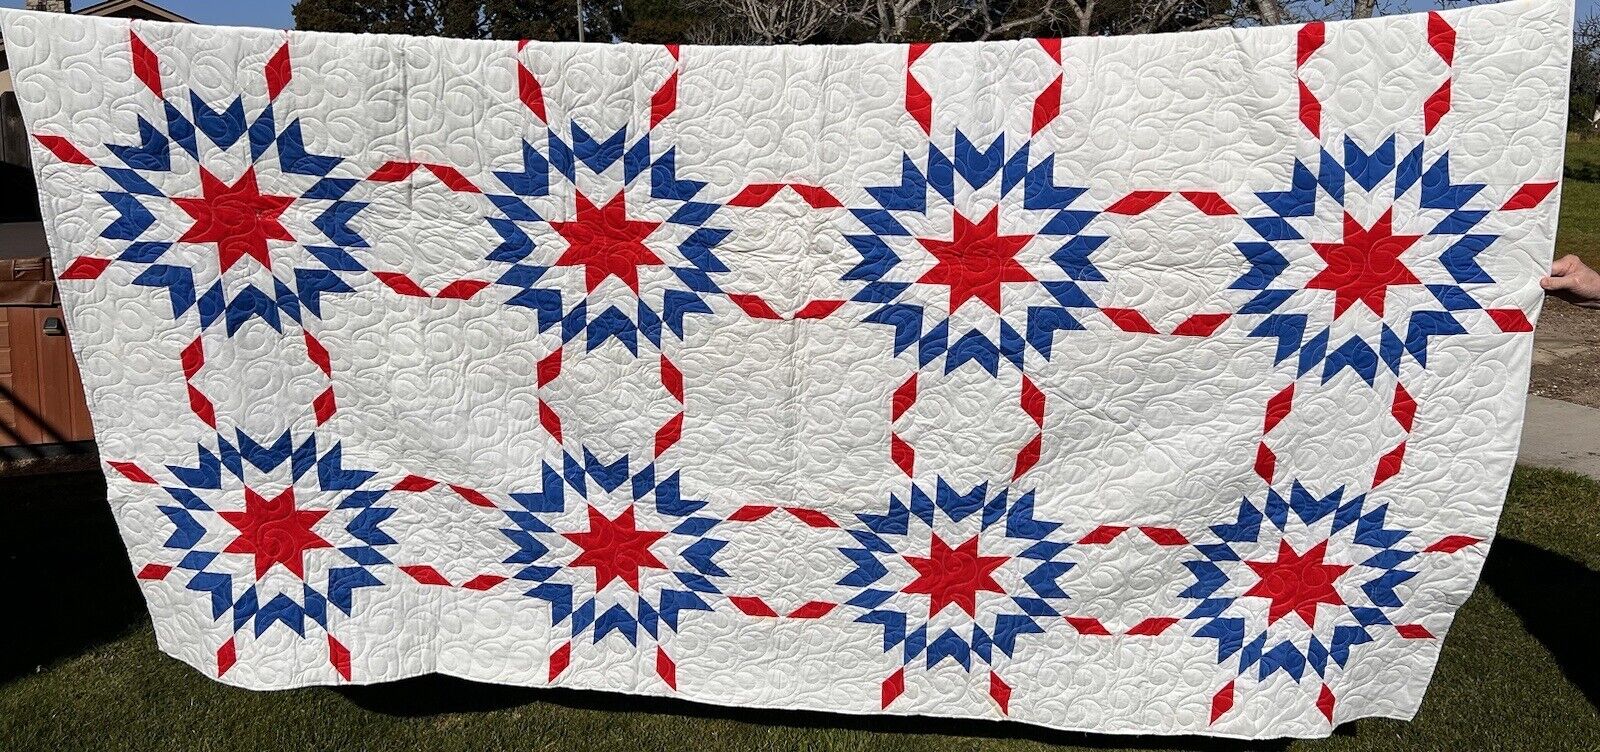 ANTIQUE (1975) STAR PATTERN QUILT over-sized King 116”x87”~RED, WHITE, BLUE New